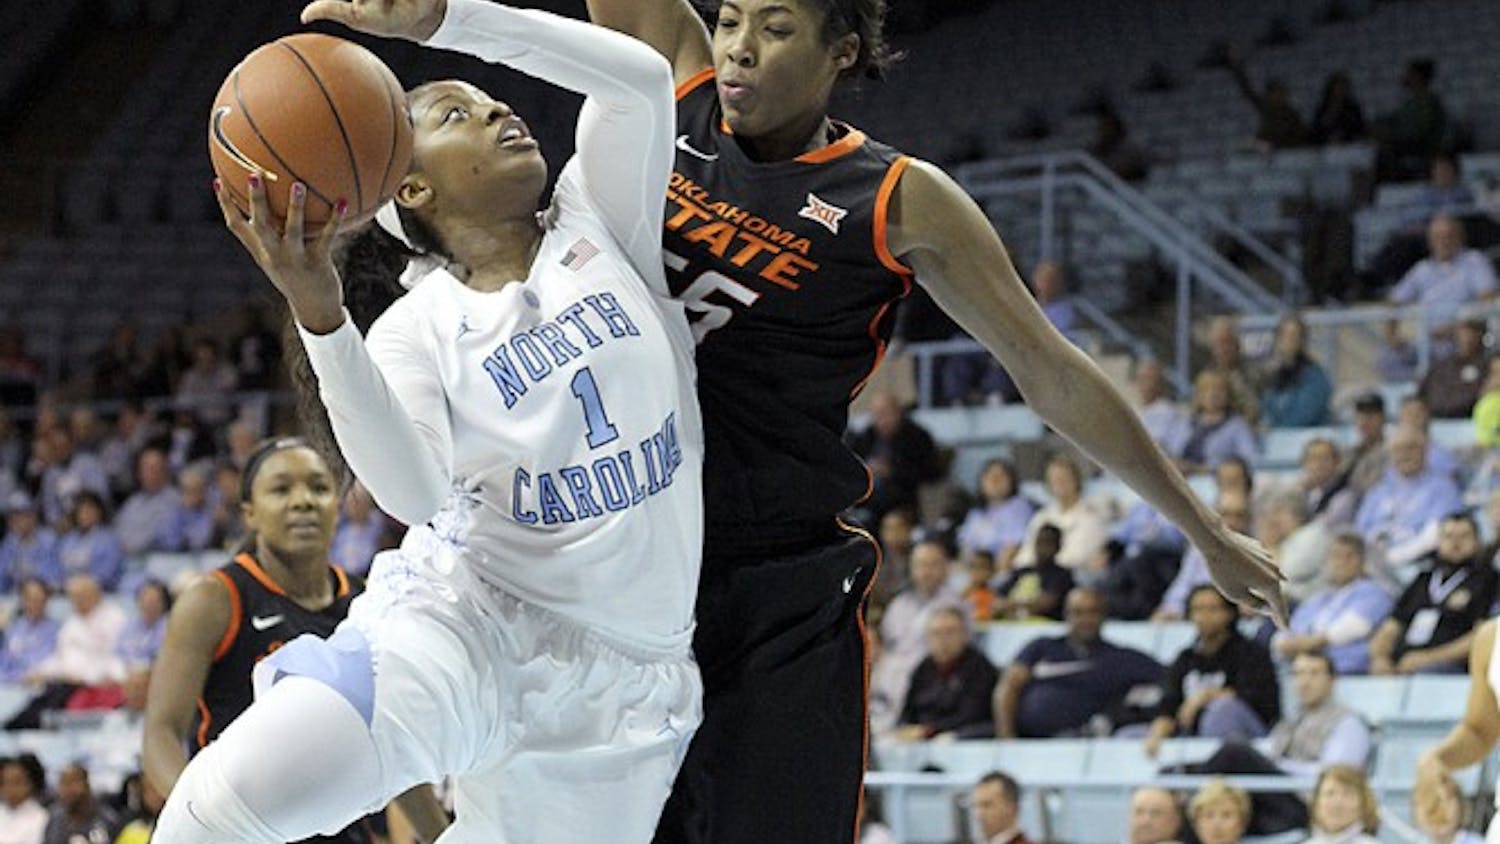 UNC's forward Stephanie Mavunga (1) shoots in the second half.  Mavunga scored 18 points in their 79-77 win against Oklahoma State on Wednesday afternoon.